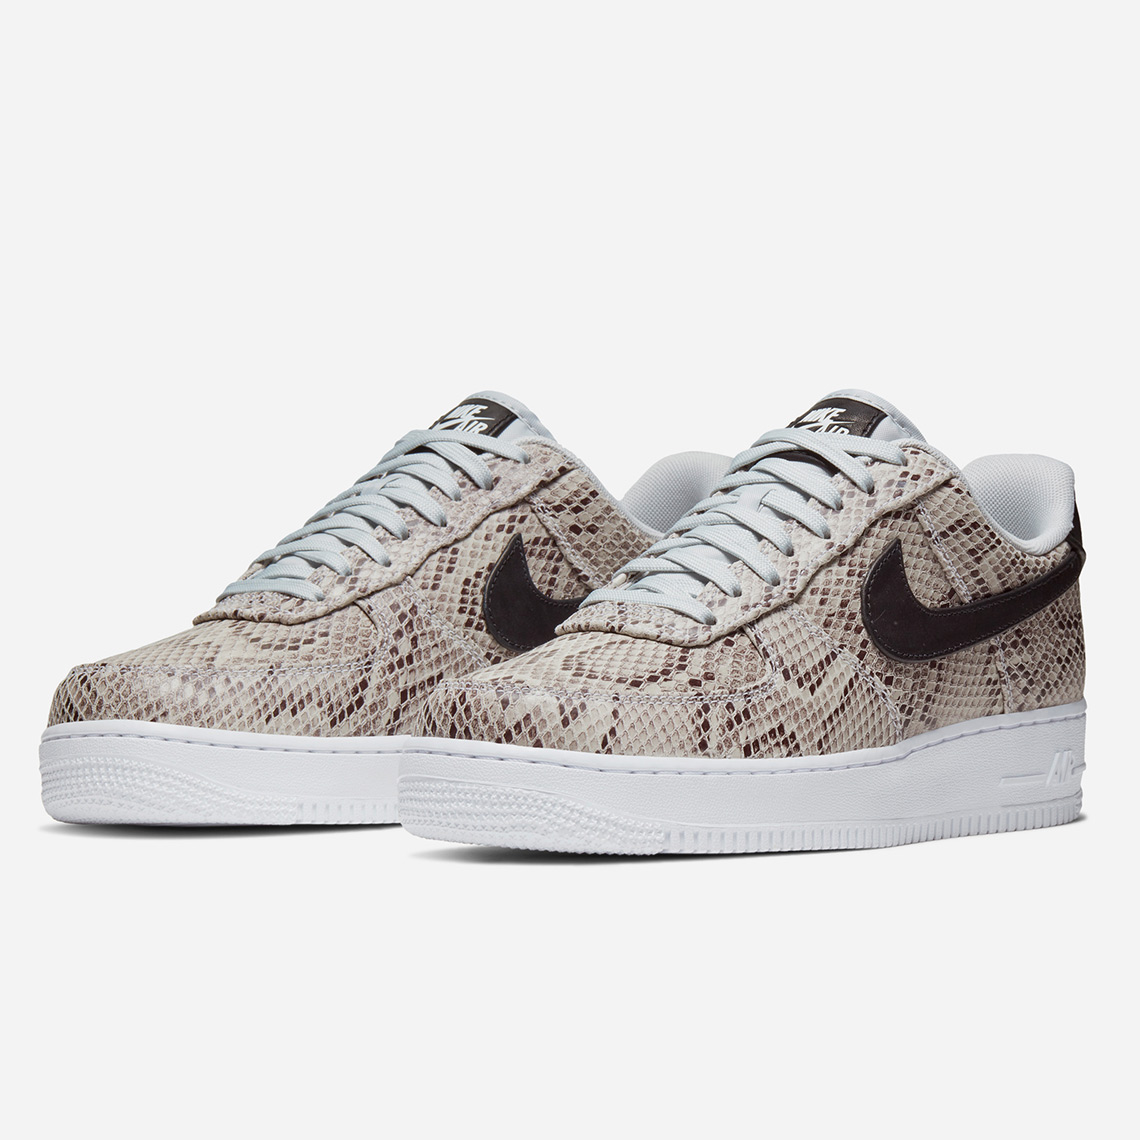 Nike Air Force 1 Low Snakeskin Holiday 2019 | SneakerNews.com